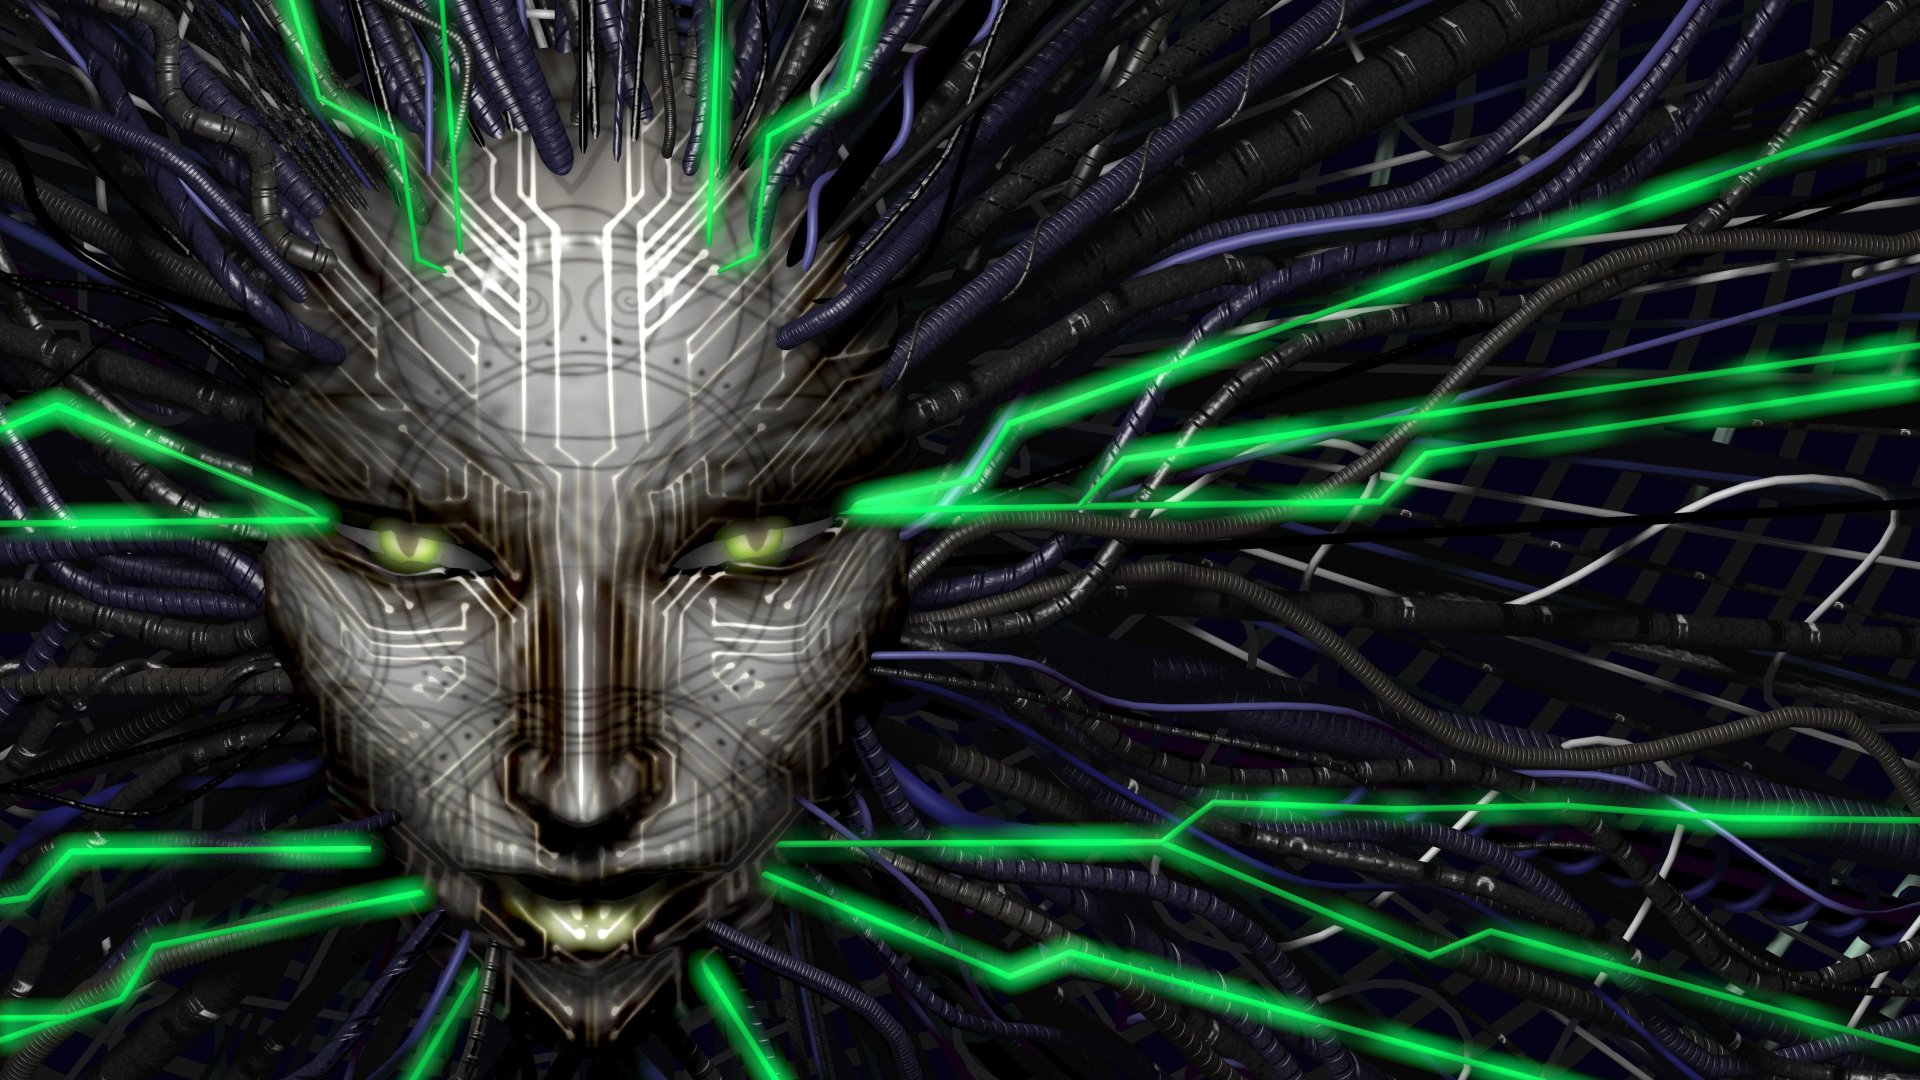 system shock 2 patch notes 2018